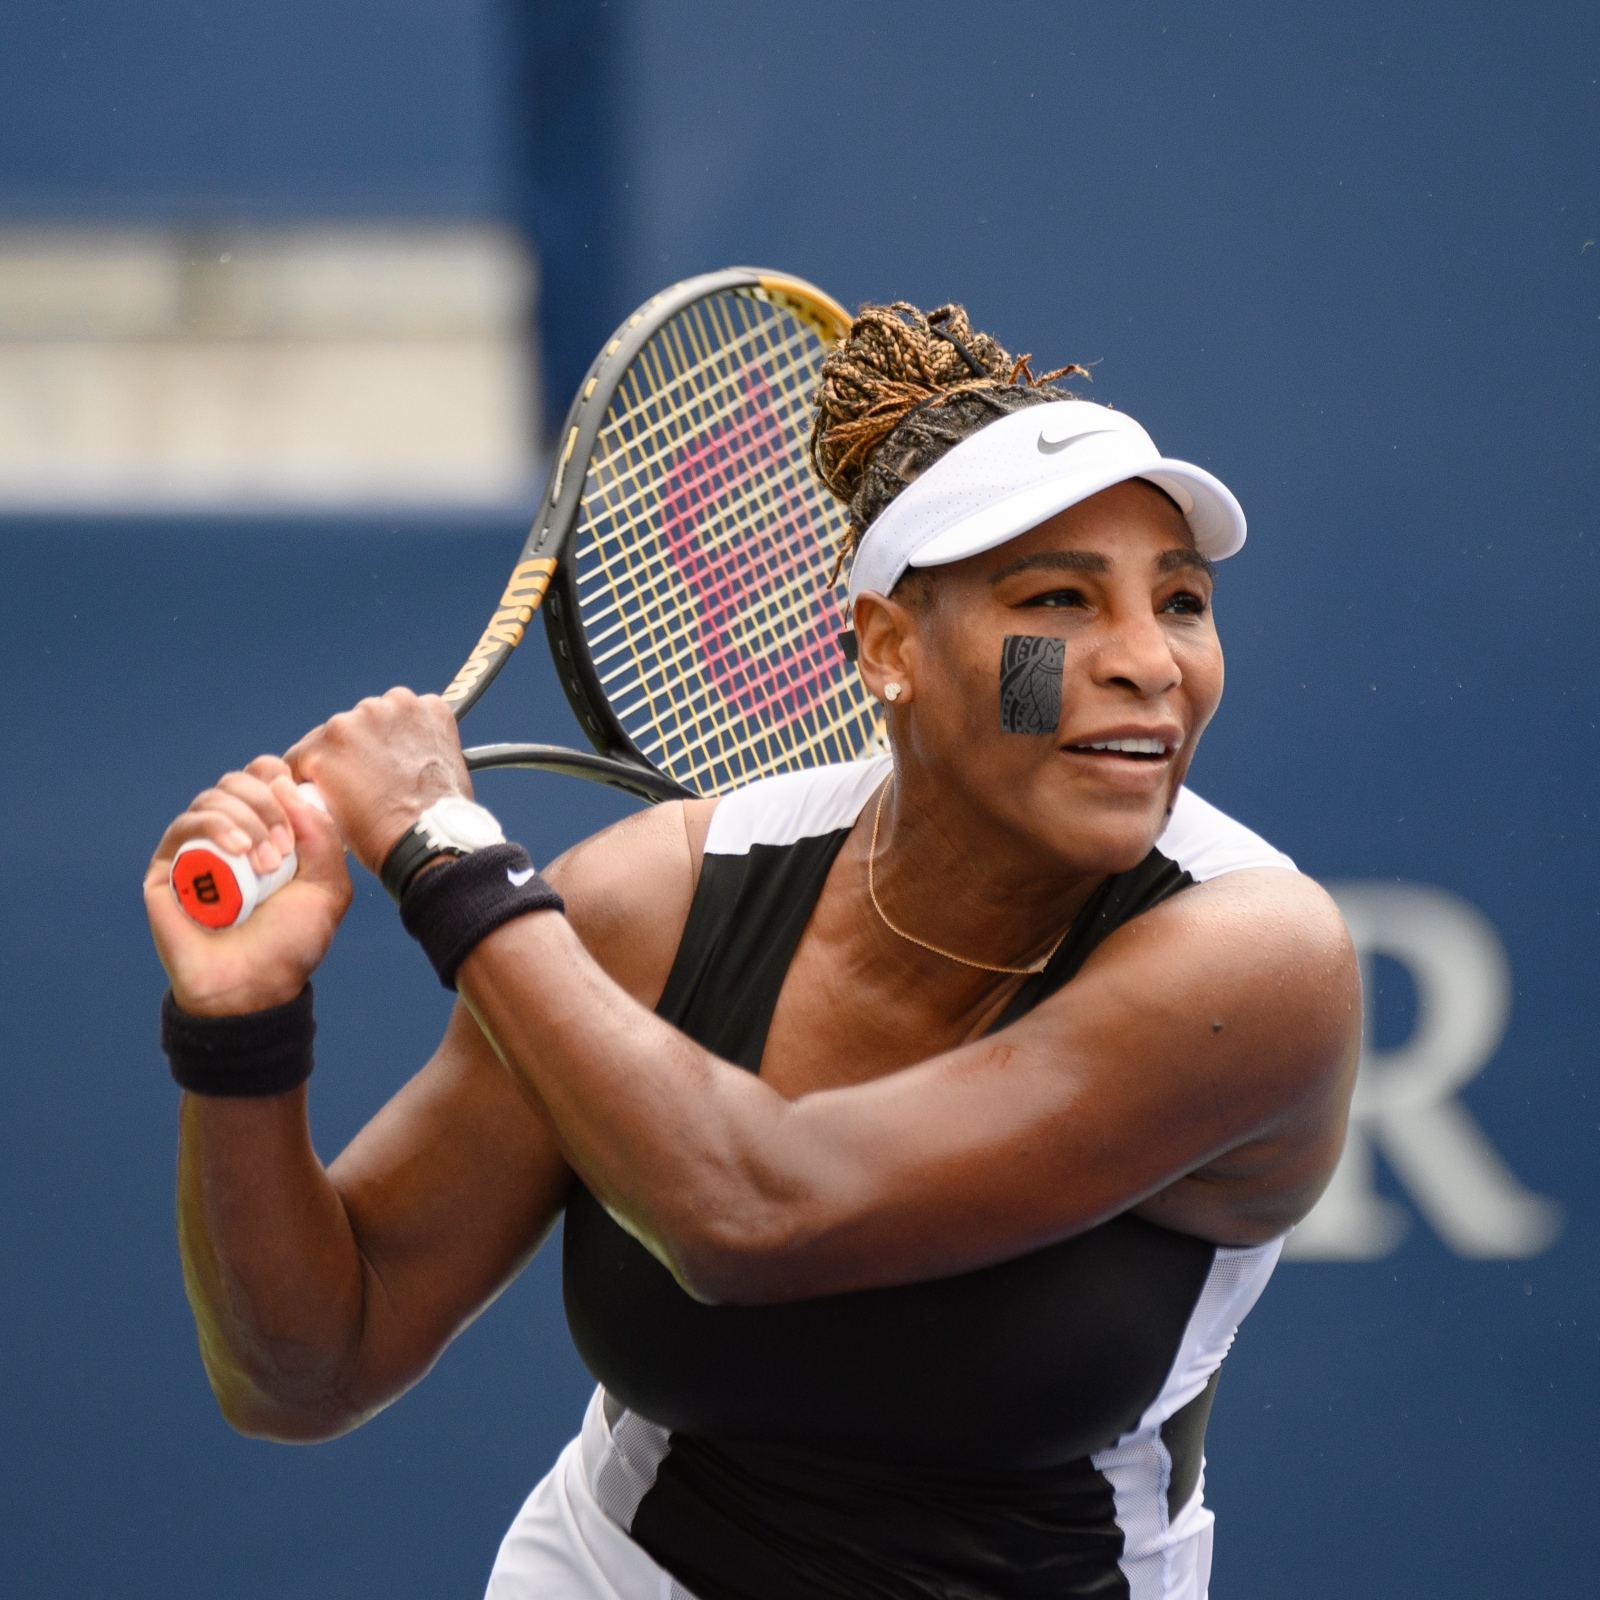 Serena Williams Planning to Retire From Tennis After US Open 2022